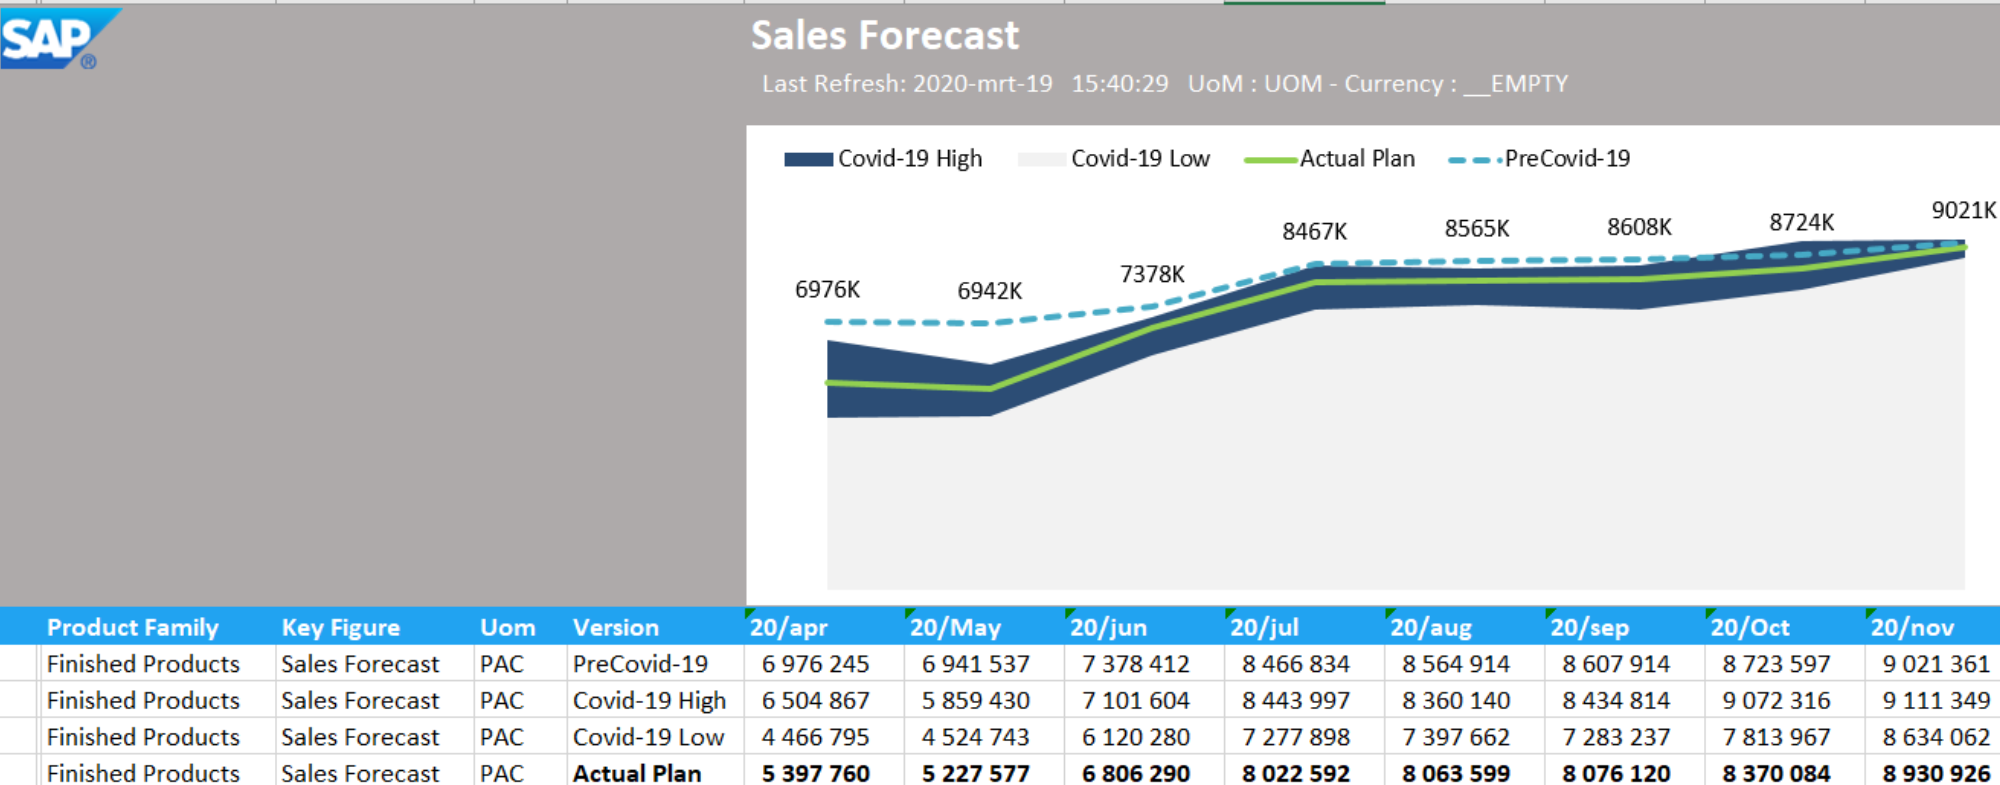 Sales Forecast diagrams by the data provided